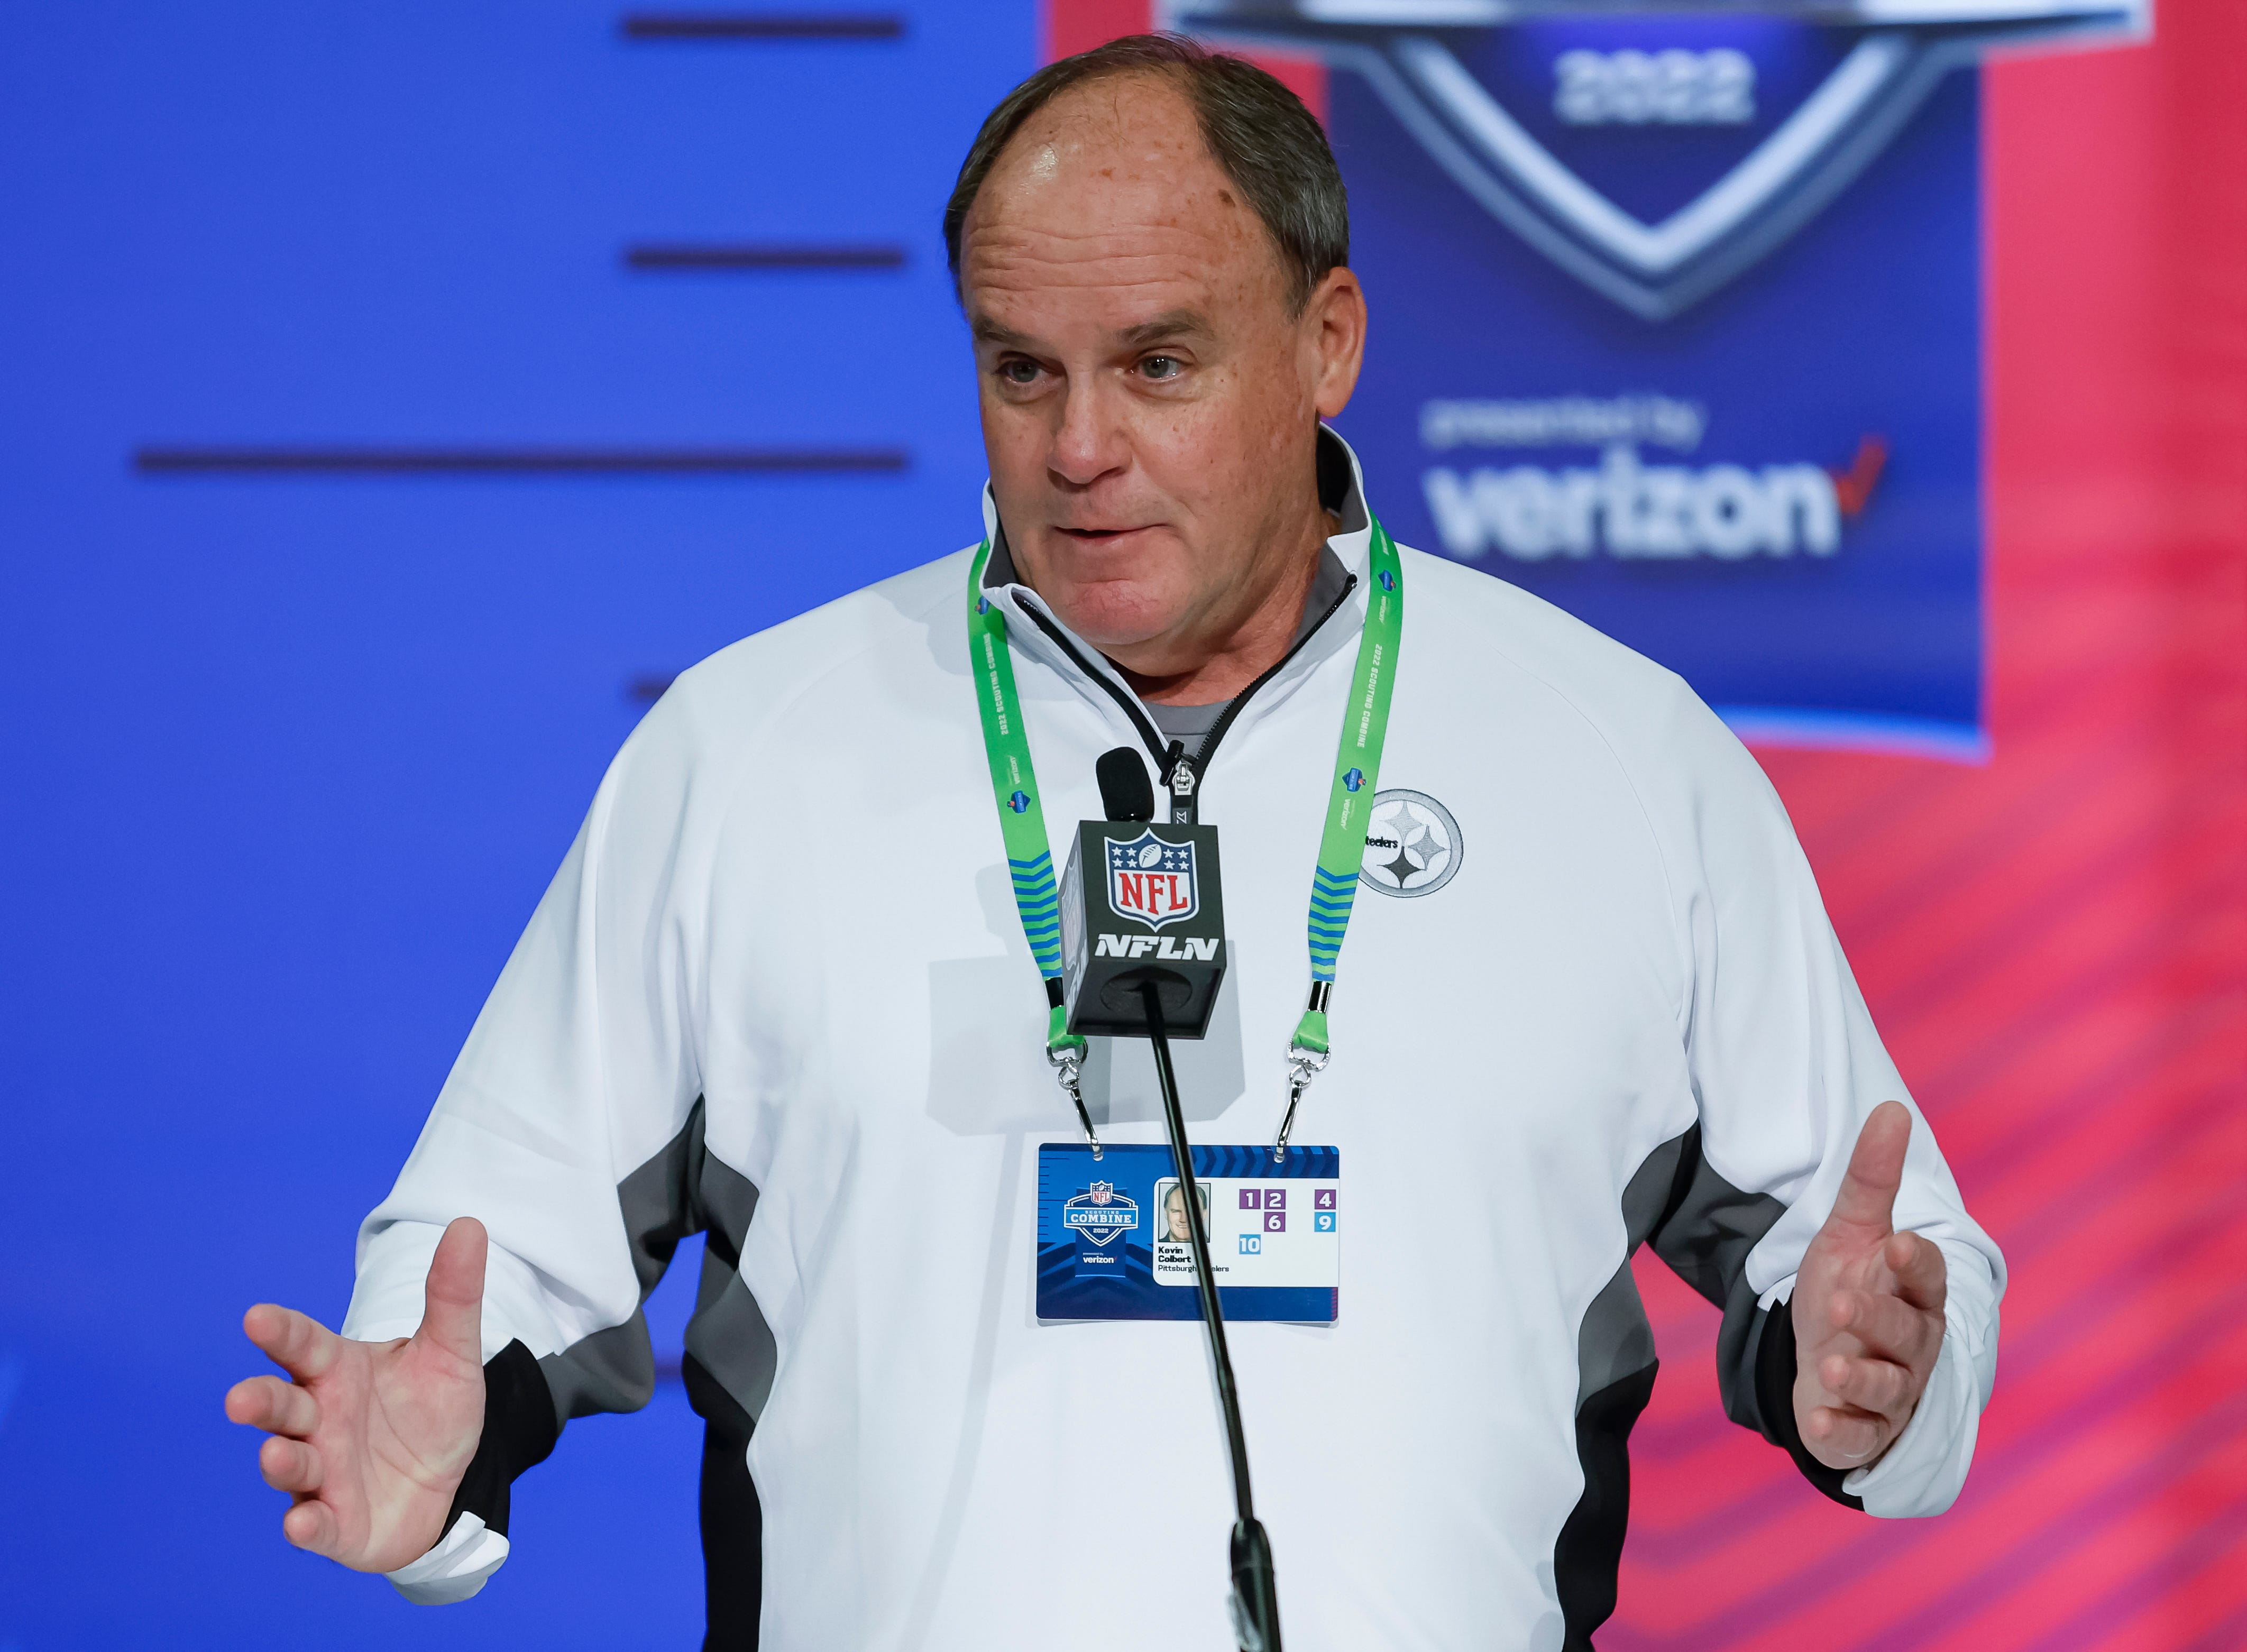 With final NFL draft, outgoing Steelers GM gets deserved Steel Curtain call | Opinion